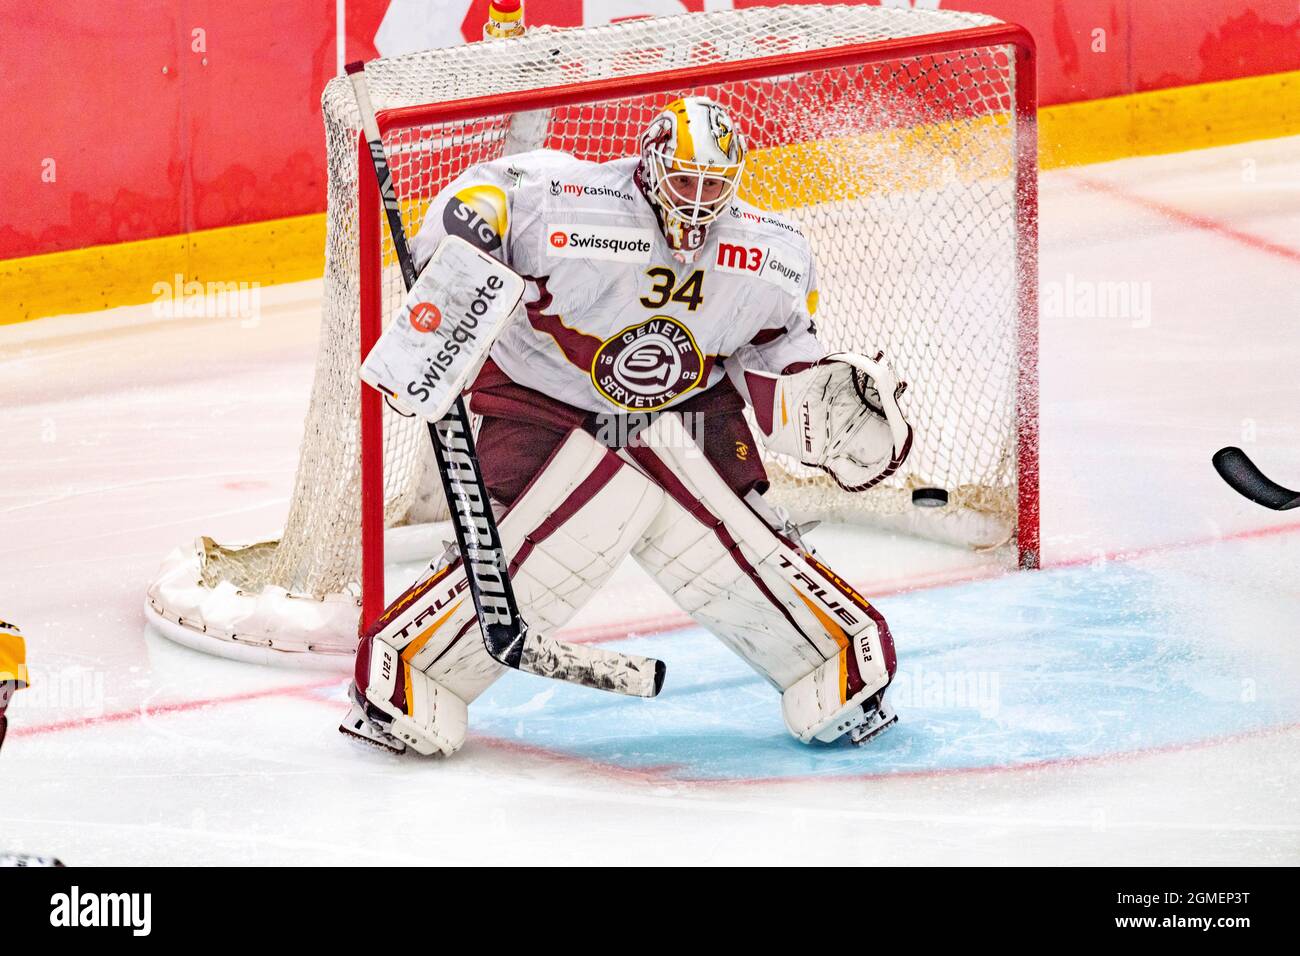 Lausanne Switzerland, 09/17/2021: Gauthier Descloux (goalkeeper) of Geneva-Servette Hc is in action during the 5th match of the 2021-2022 Swiss National League Season with the Lausanne Hc and Geneva-Servette Hc (Photo by Eric Dubost / Pacific Press/Sipa USA) Stock Photo